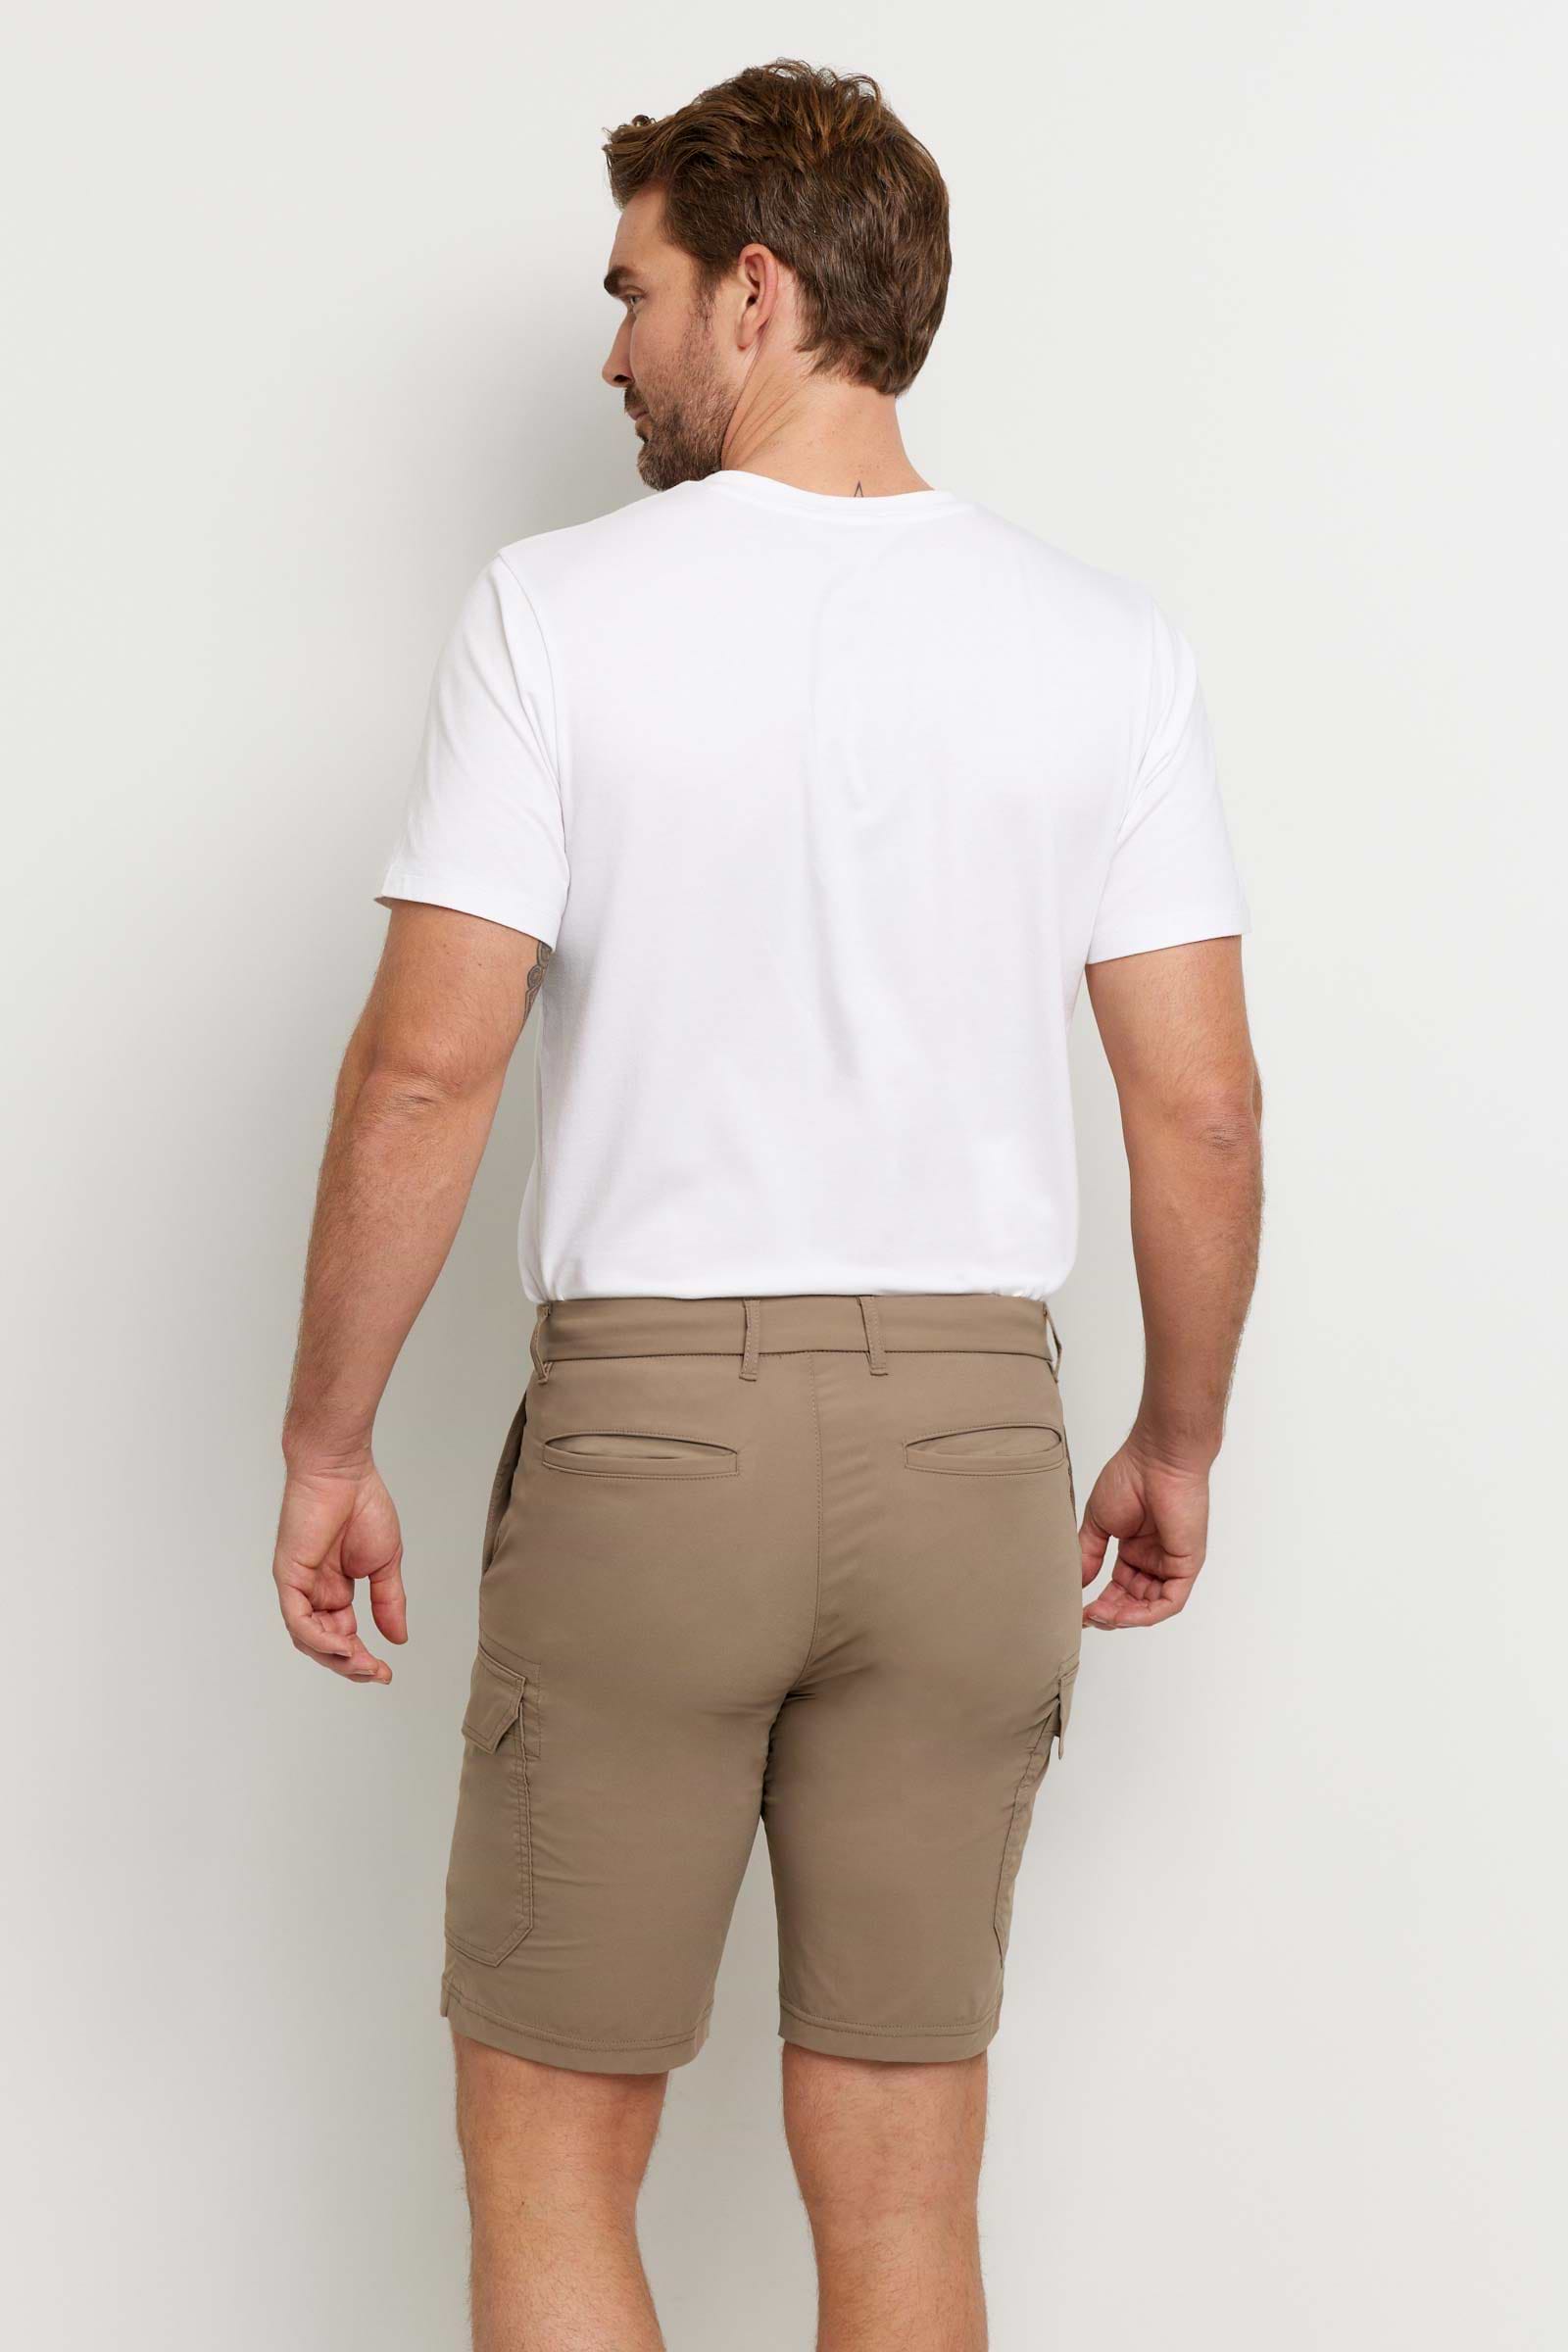 The Best Travel Shorts. Man Showing the Back Profile of a Men's Randy Short in Khaki.